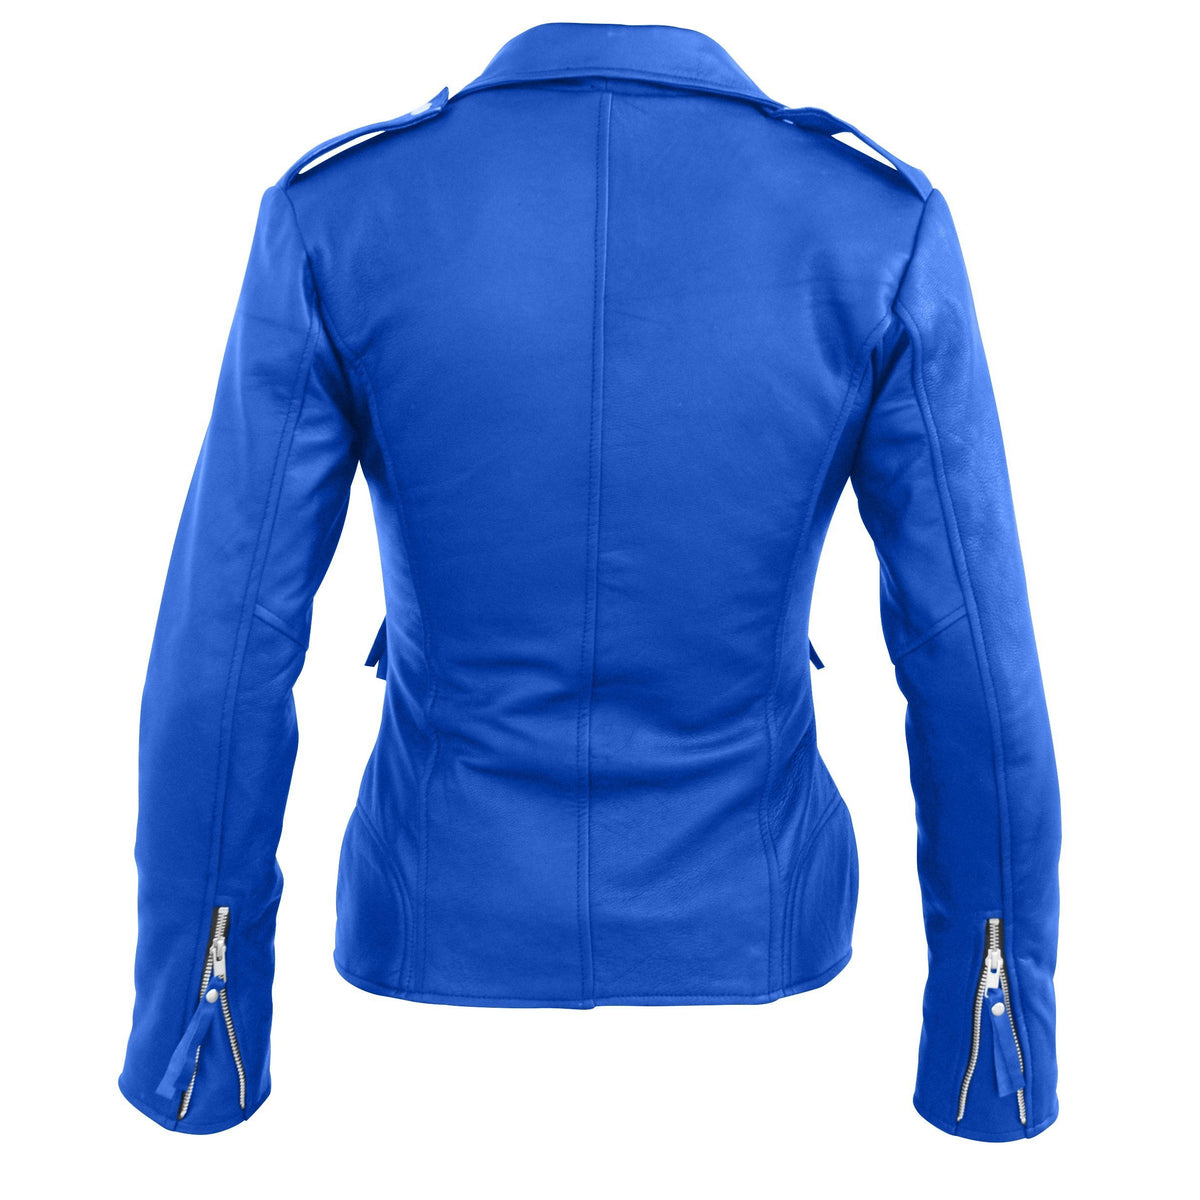 How to Rock a Blue Leather Jacket Outfit for Women - Leather Skin Shop